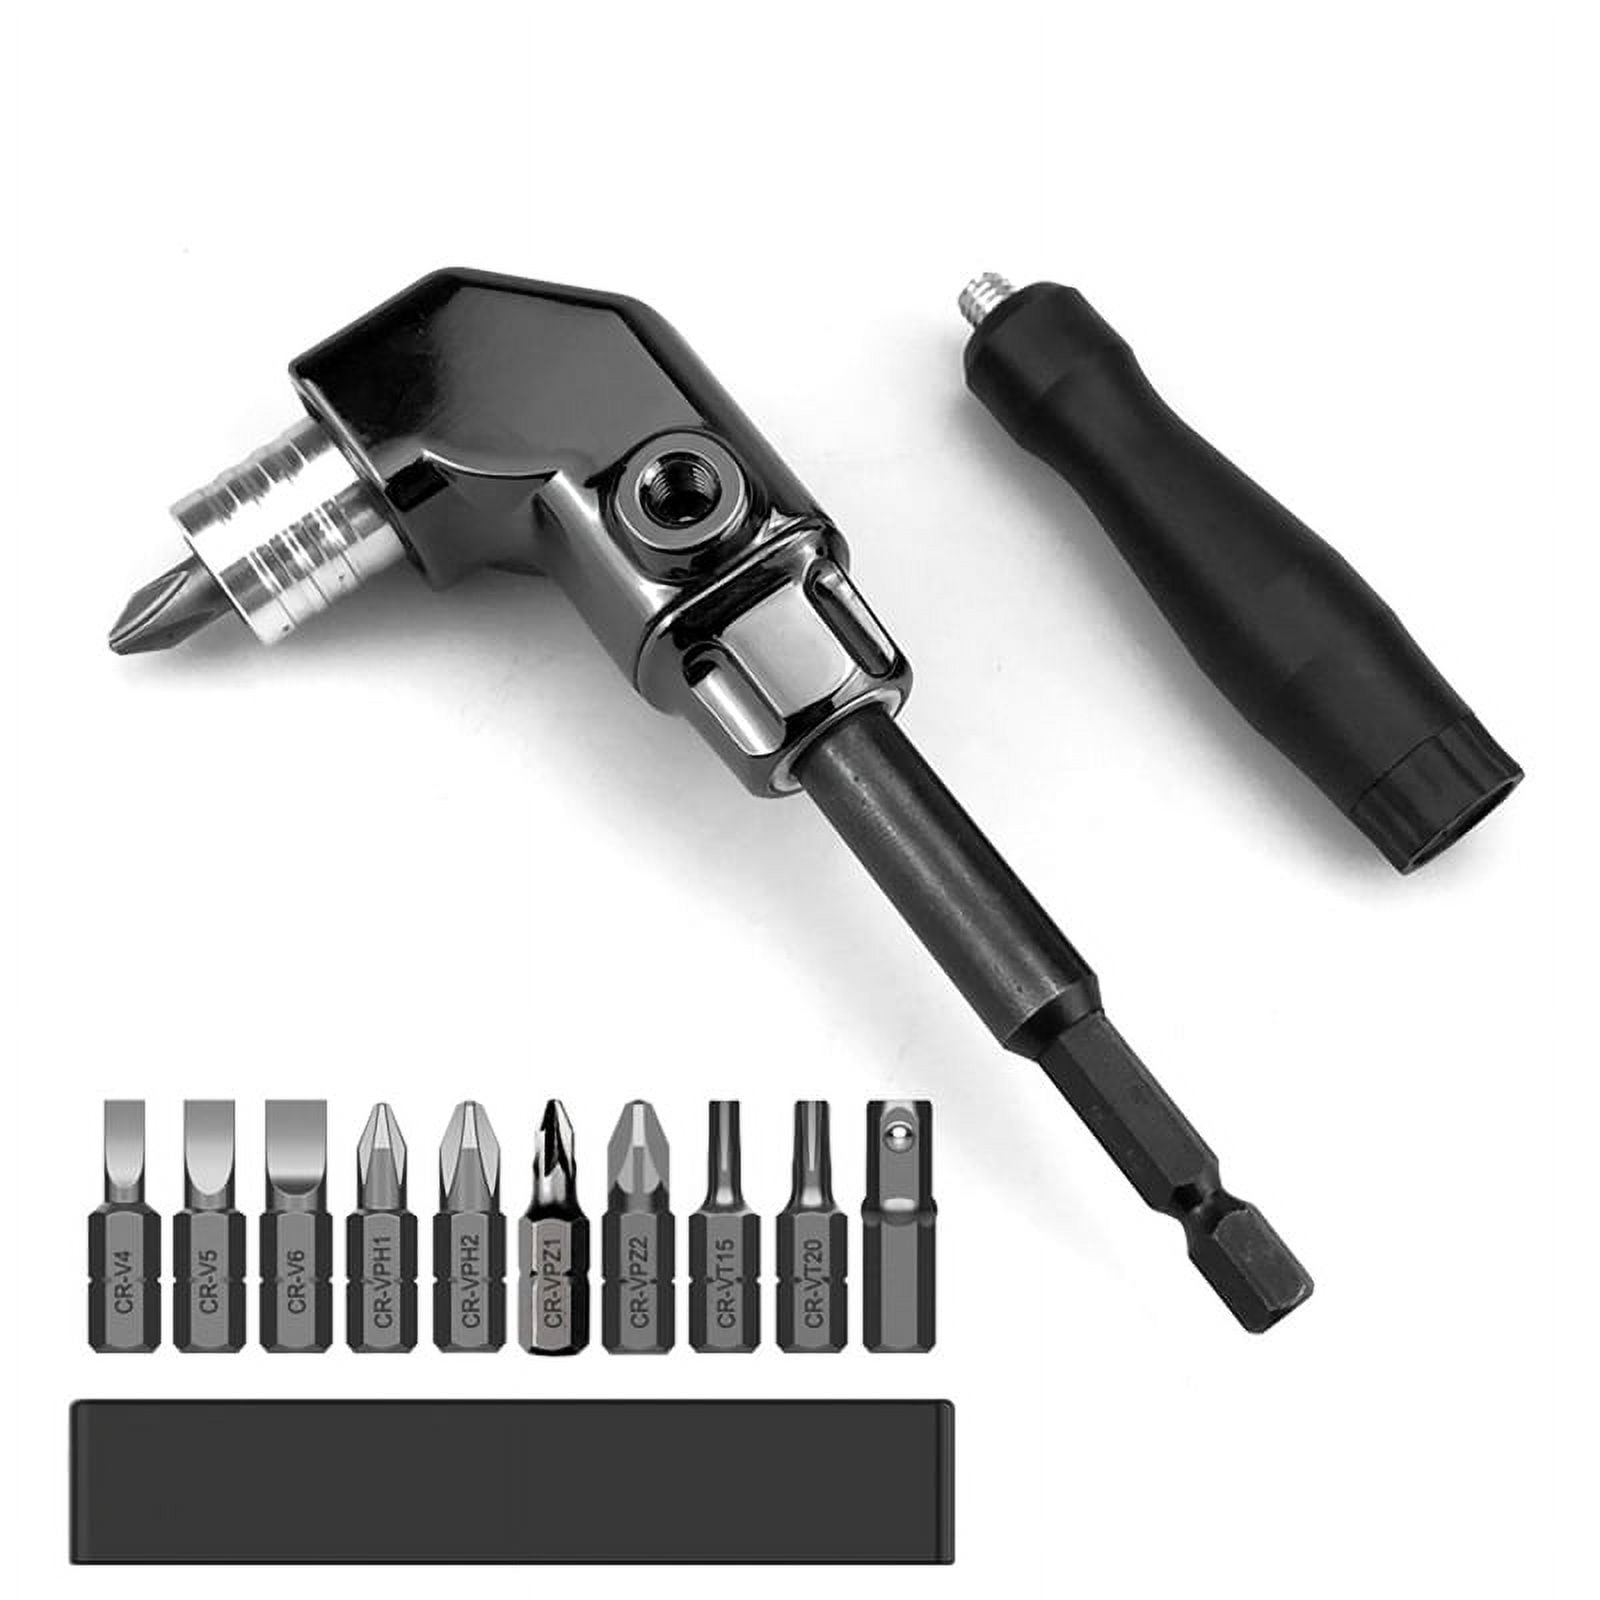 Cheap Self Locking 90 Degree Quick Change Screwdriver Holder Drive Bit  Extension Screw Driver Angle Driver Hand Tools + Screwdrivers